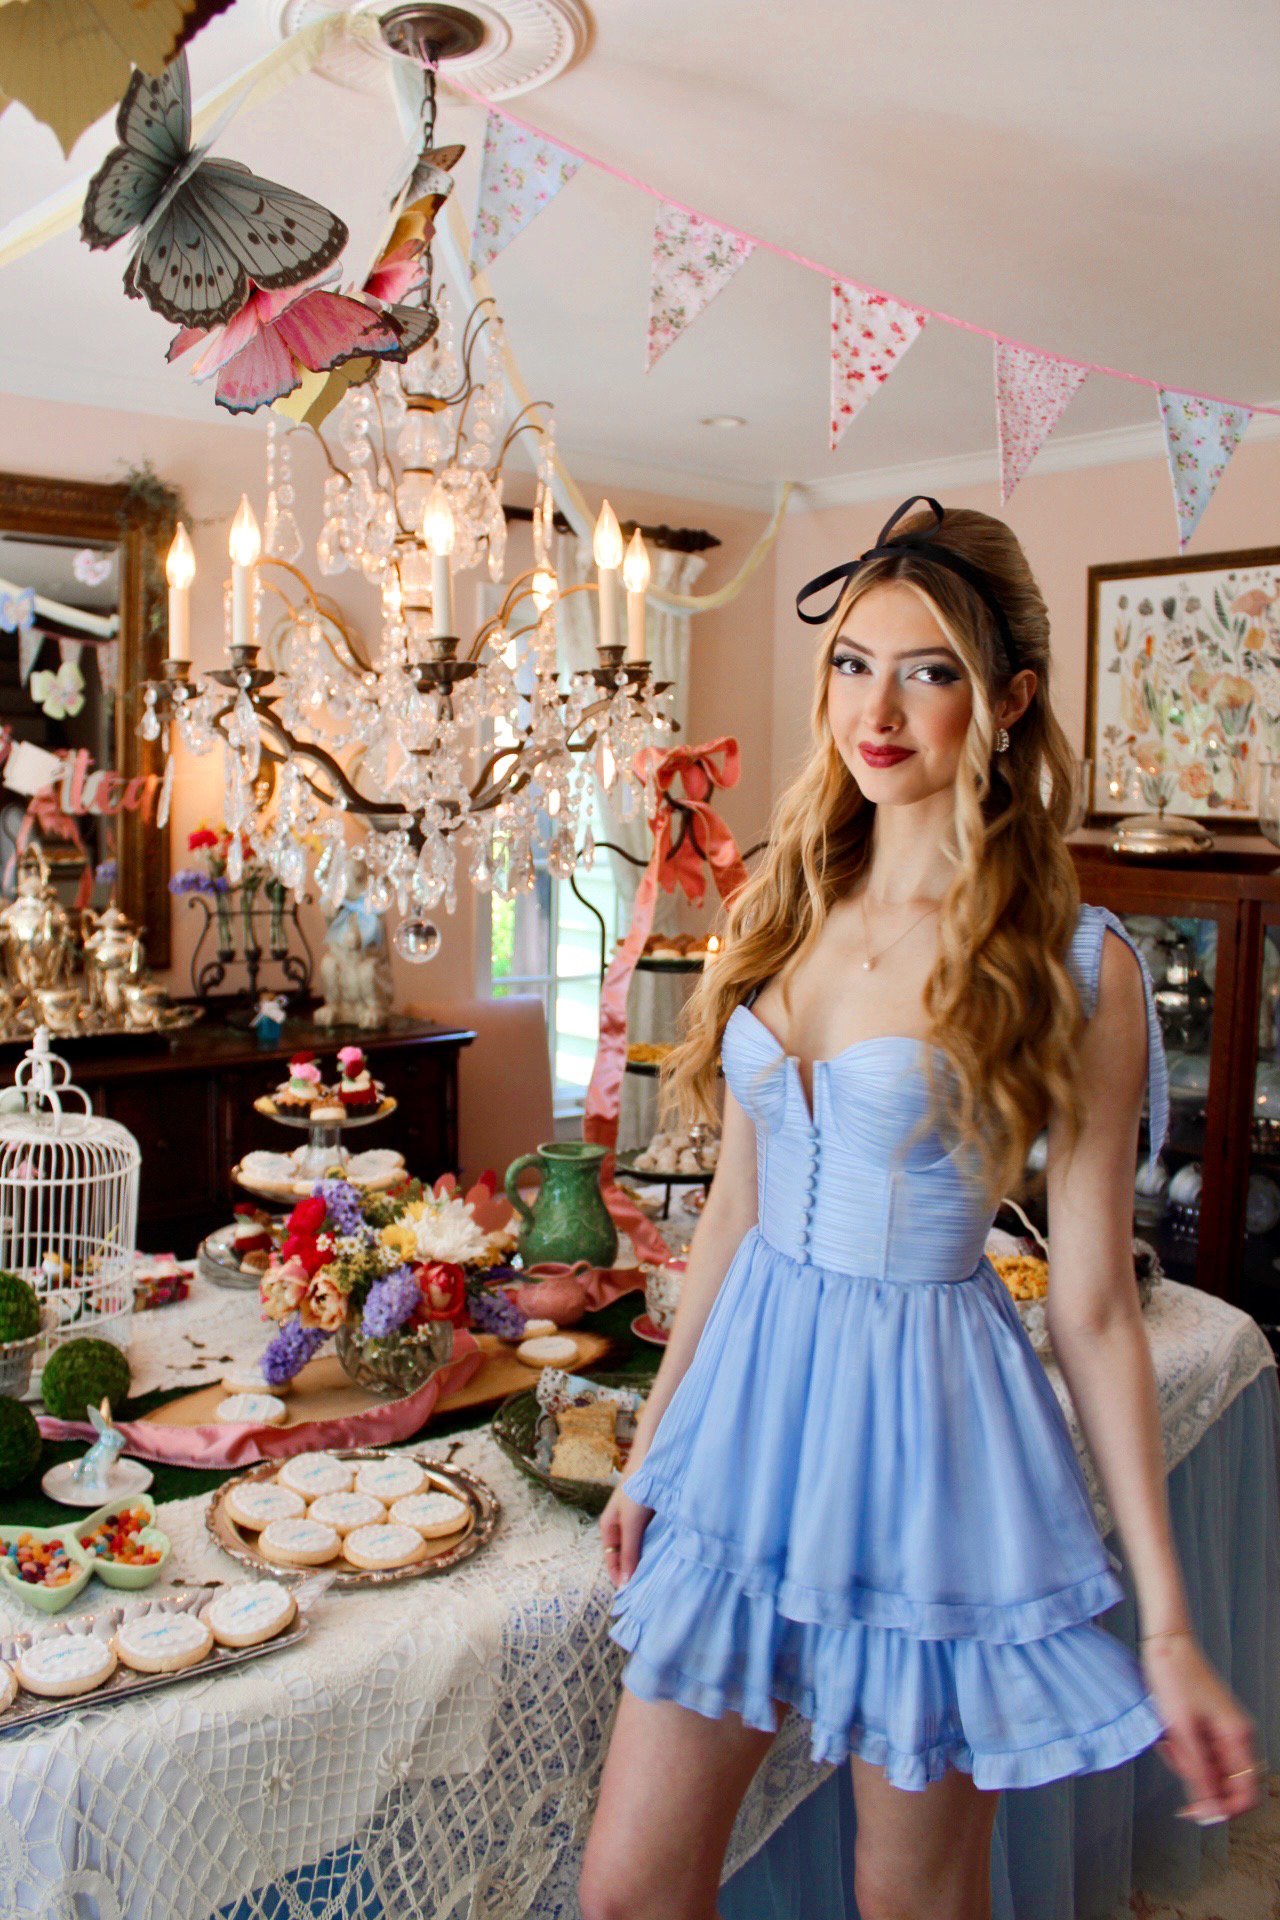 Alice in Wonderland Theme Party Ideas for a Mad Hatter's Tea Party